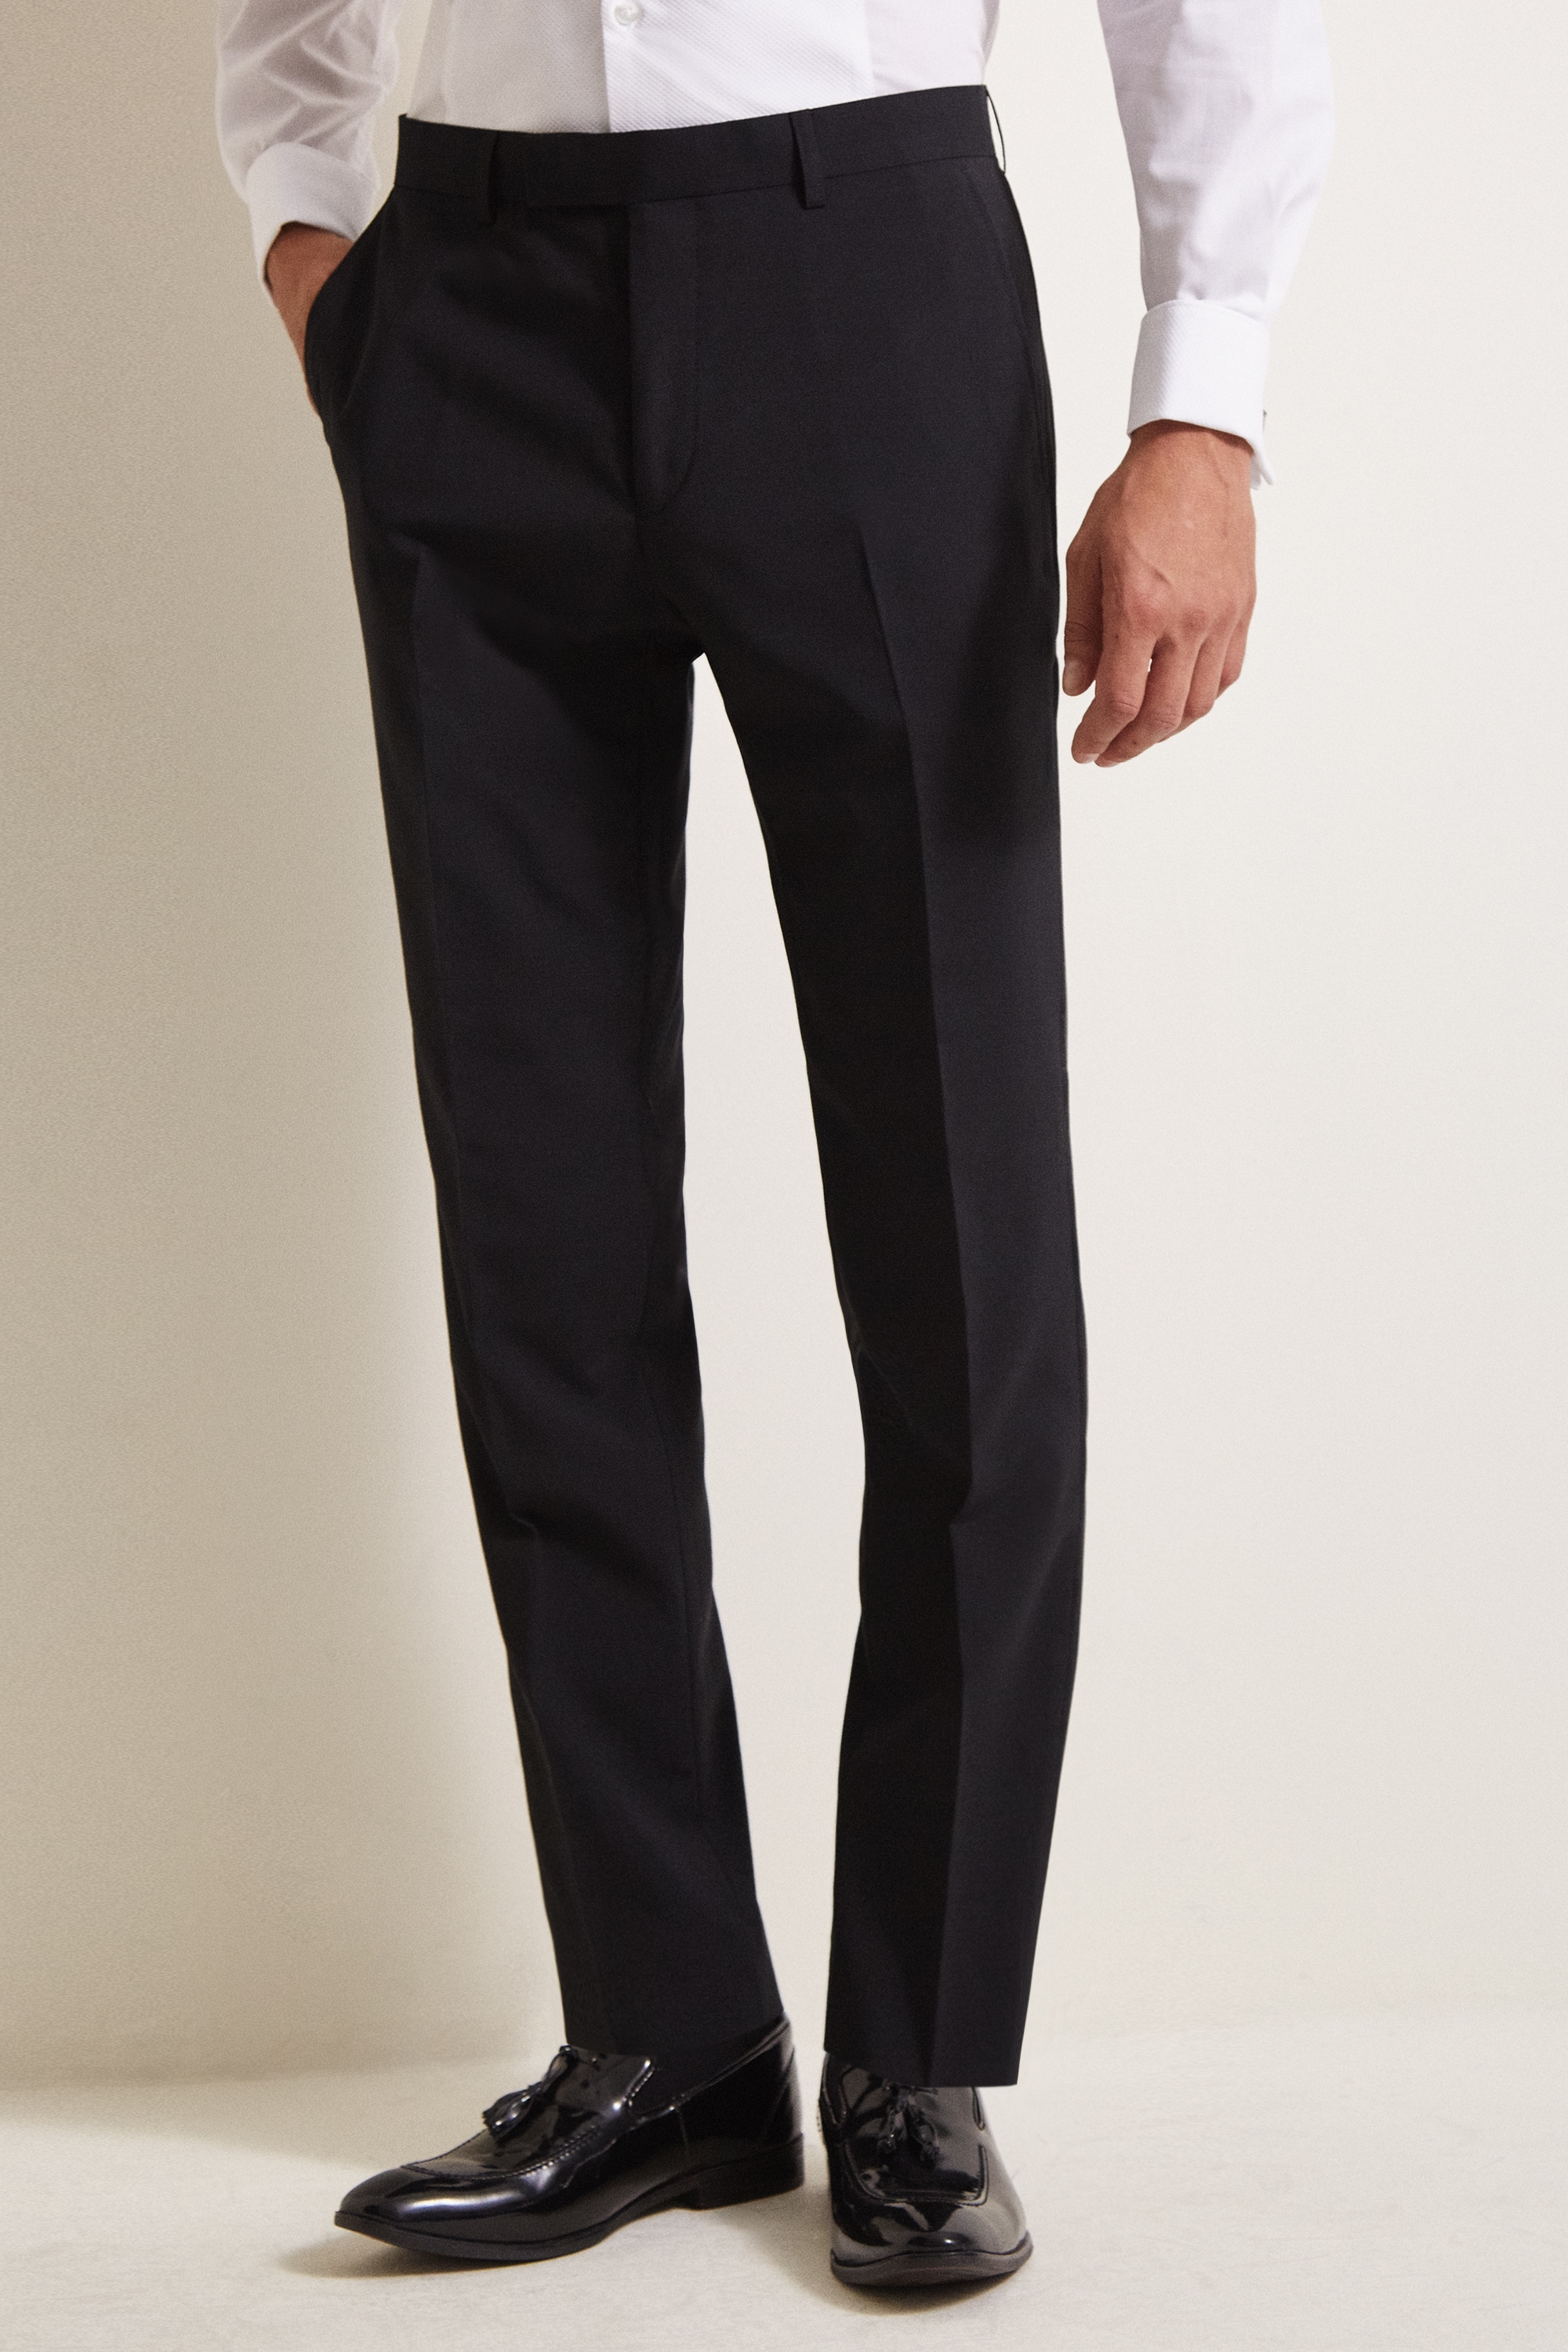 Buy Avalino Black Suit Trousers for 7000  Free Returns